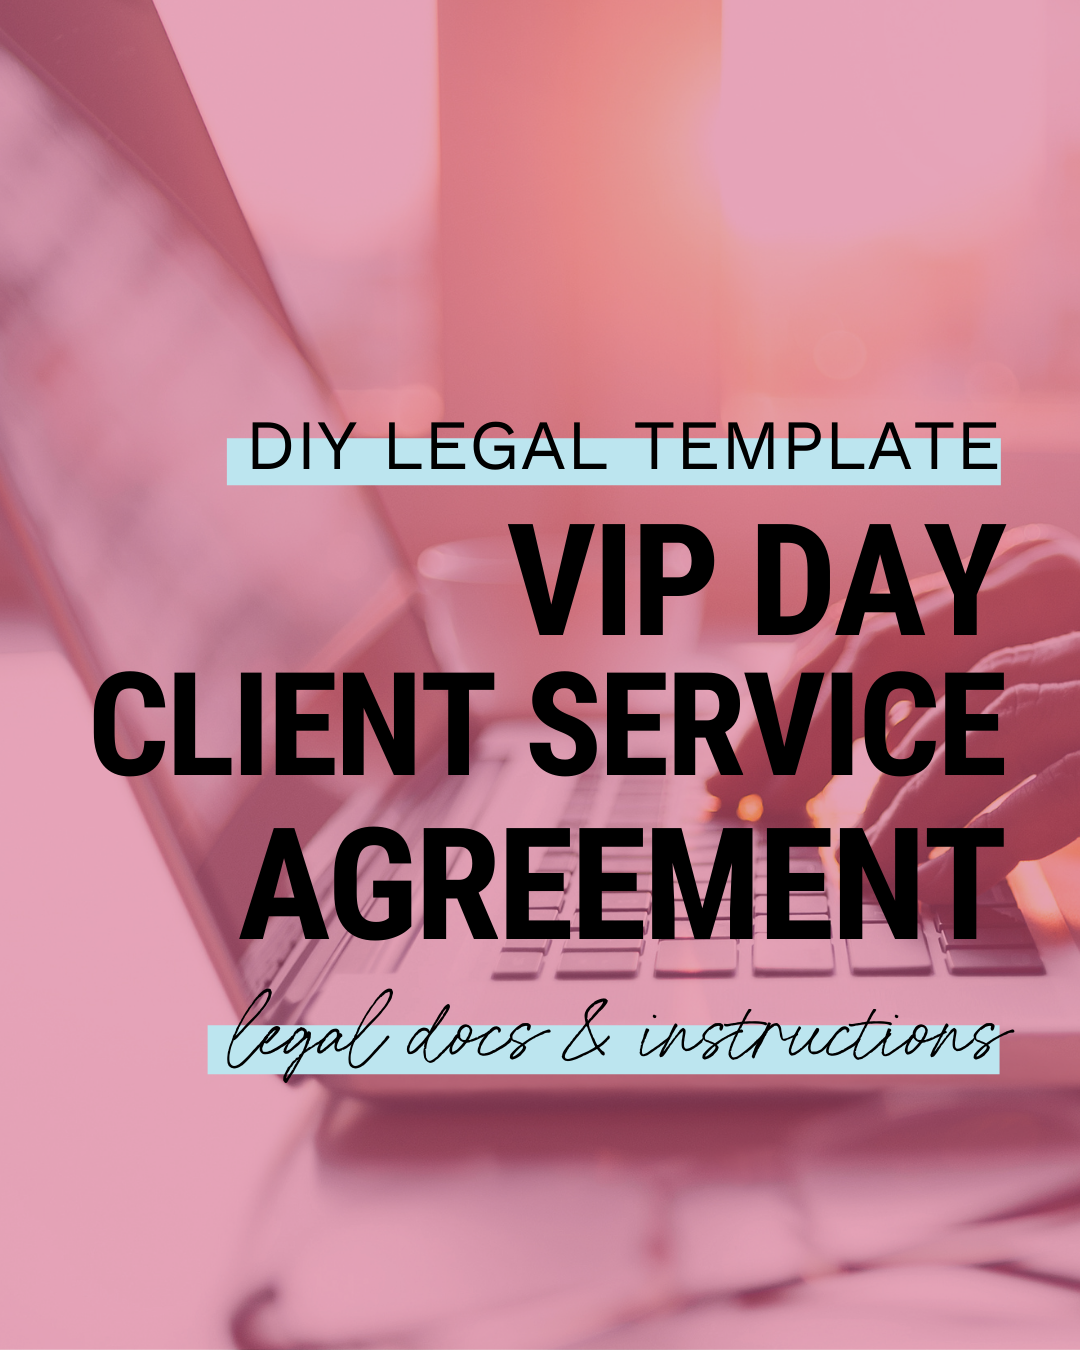 VIP Day Client Service Agreement